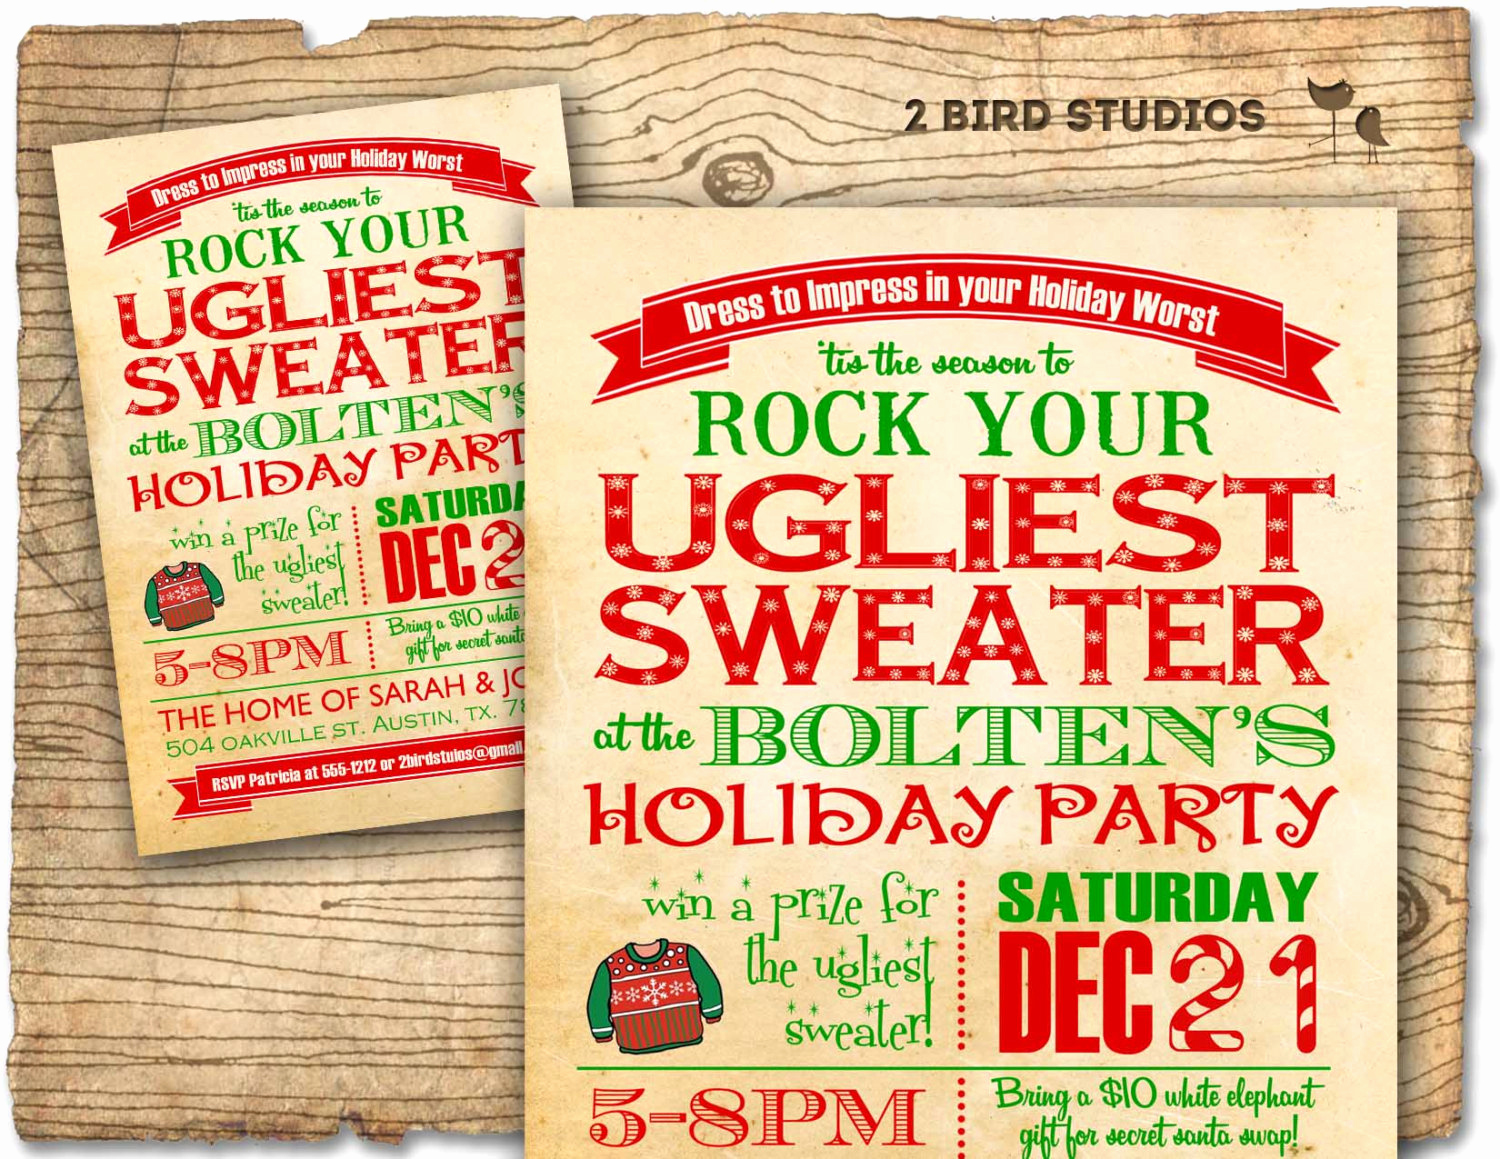 Ugly Sweater Christmas Party Invitation Inspirational Holiday Party Invitation Ugly Sweater Christmas Party